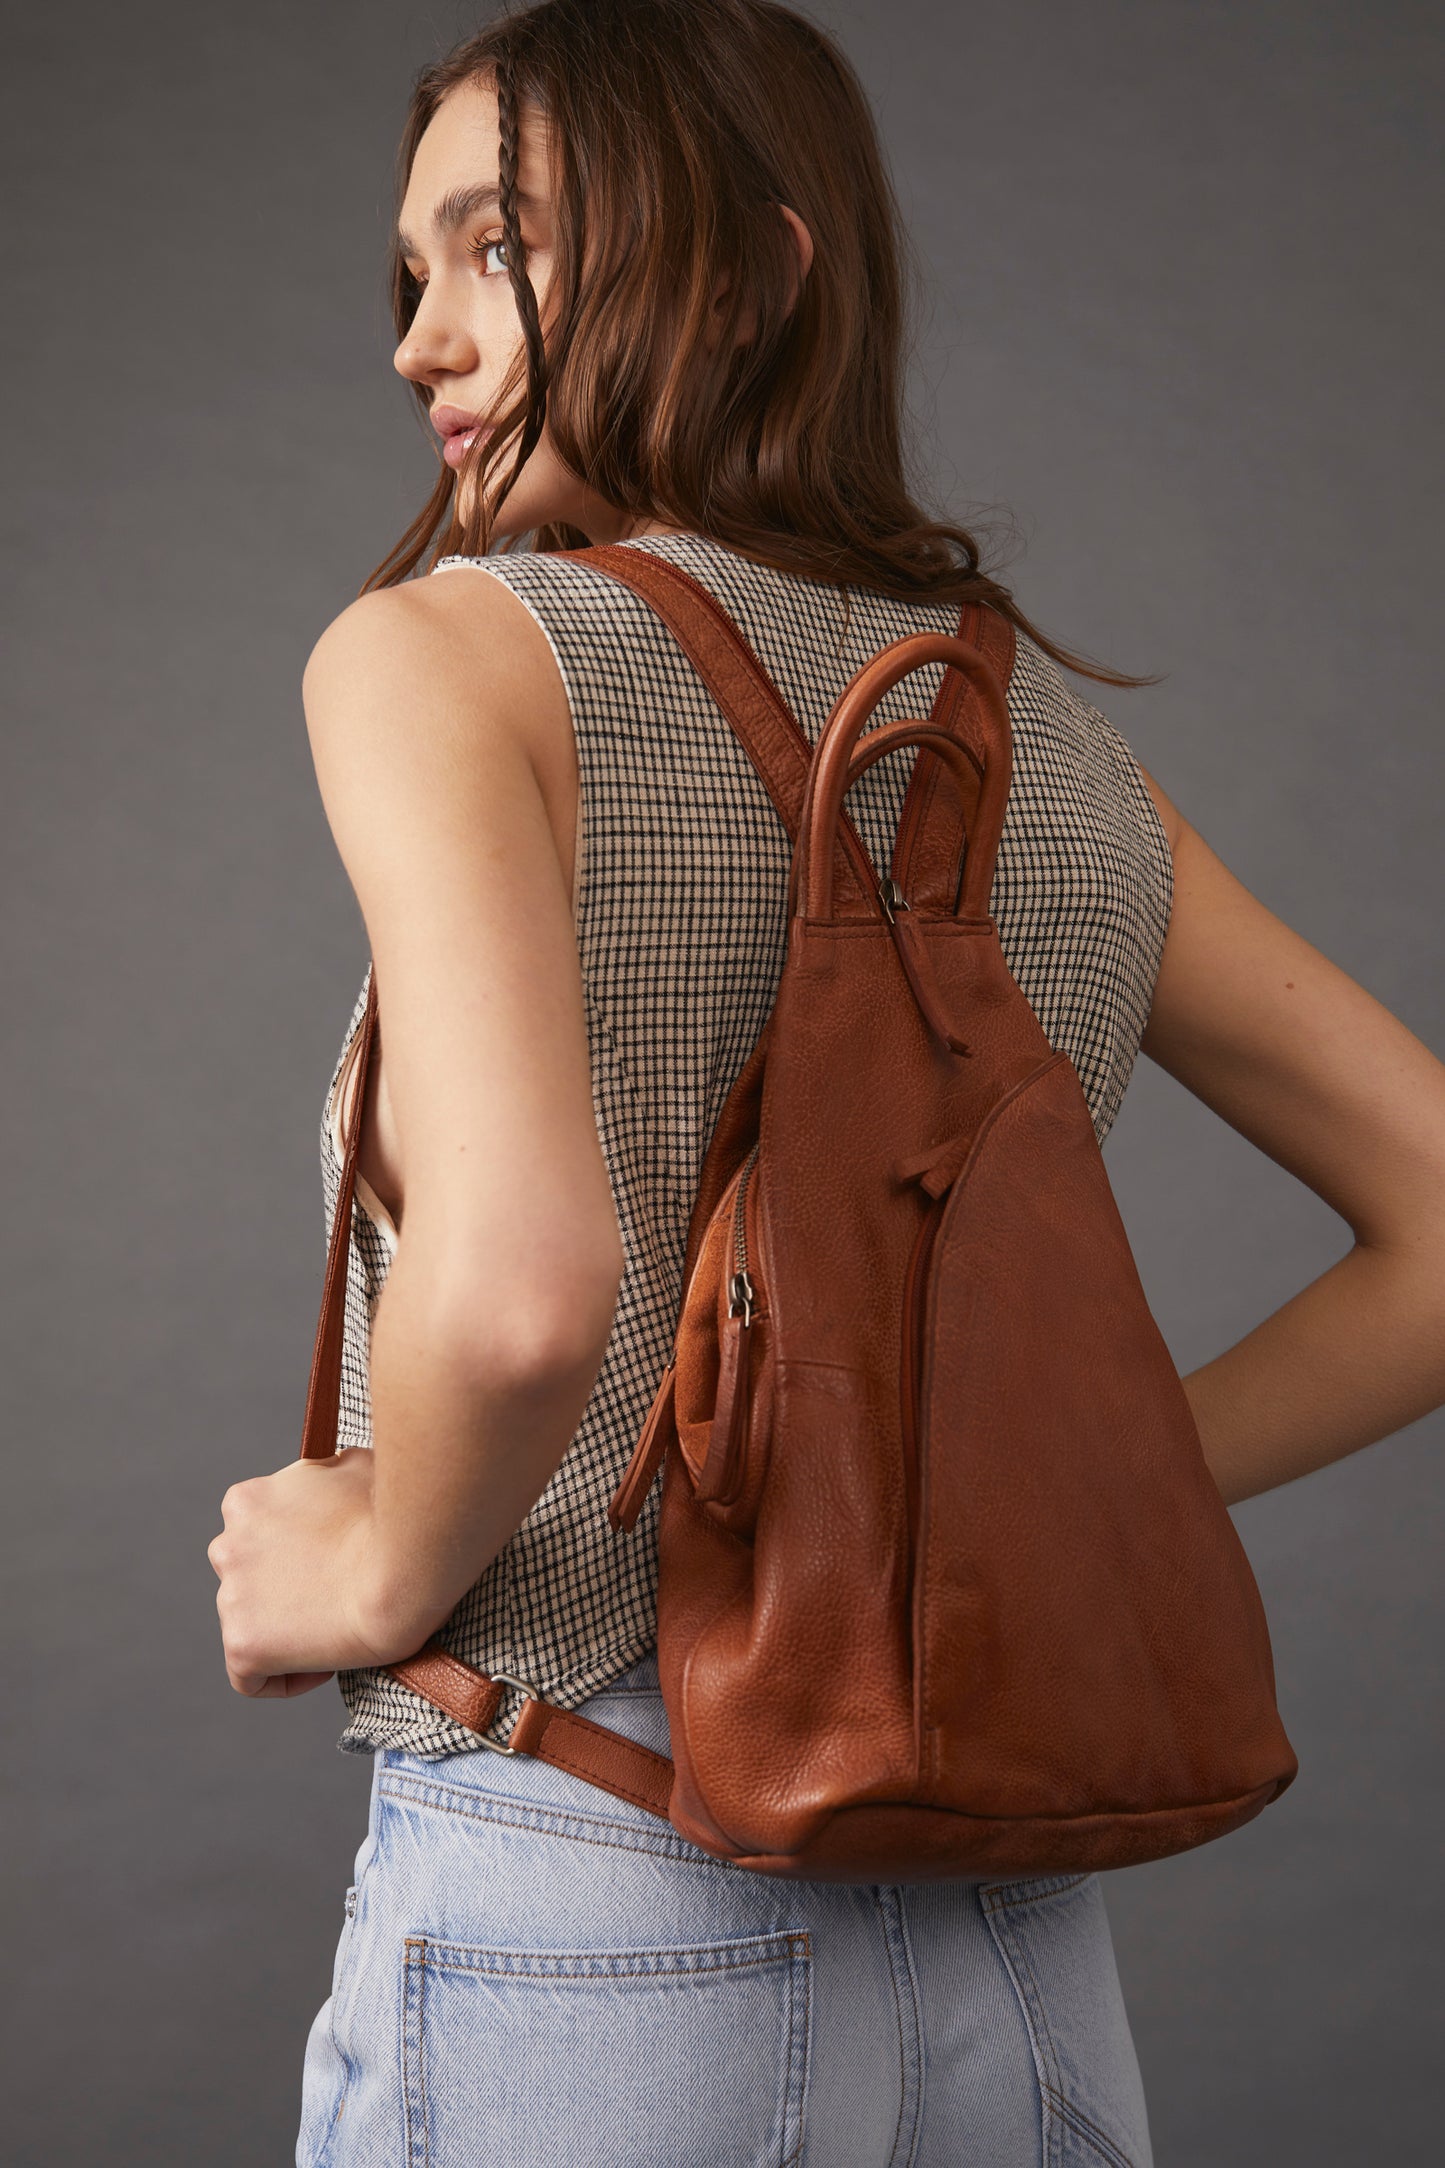 FREE PEOPLE WE THE FREE SOHO CONVERTIBLE TOTE BAG DISTRESSED BROWN